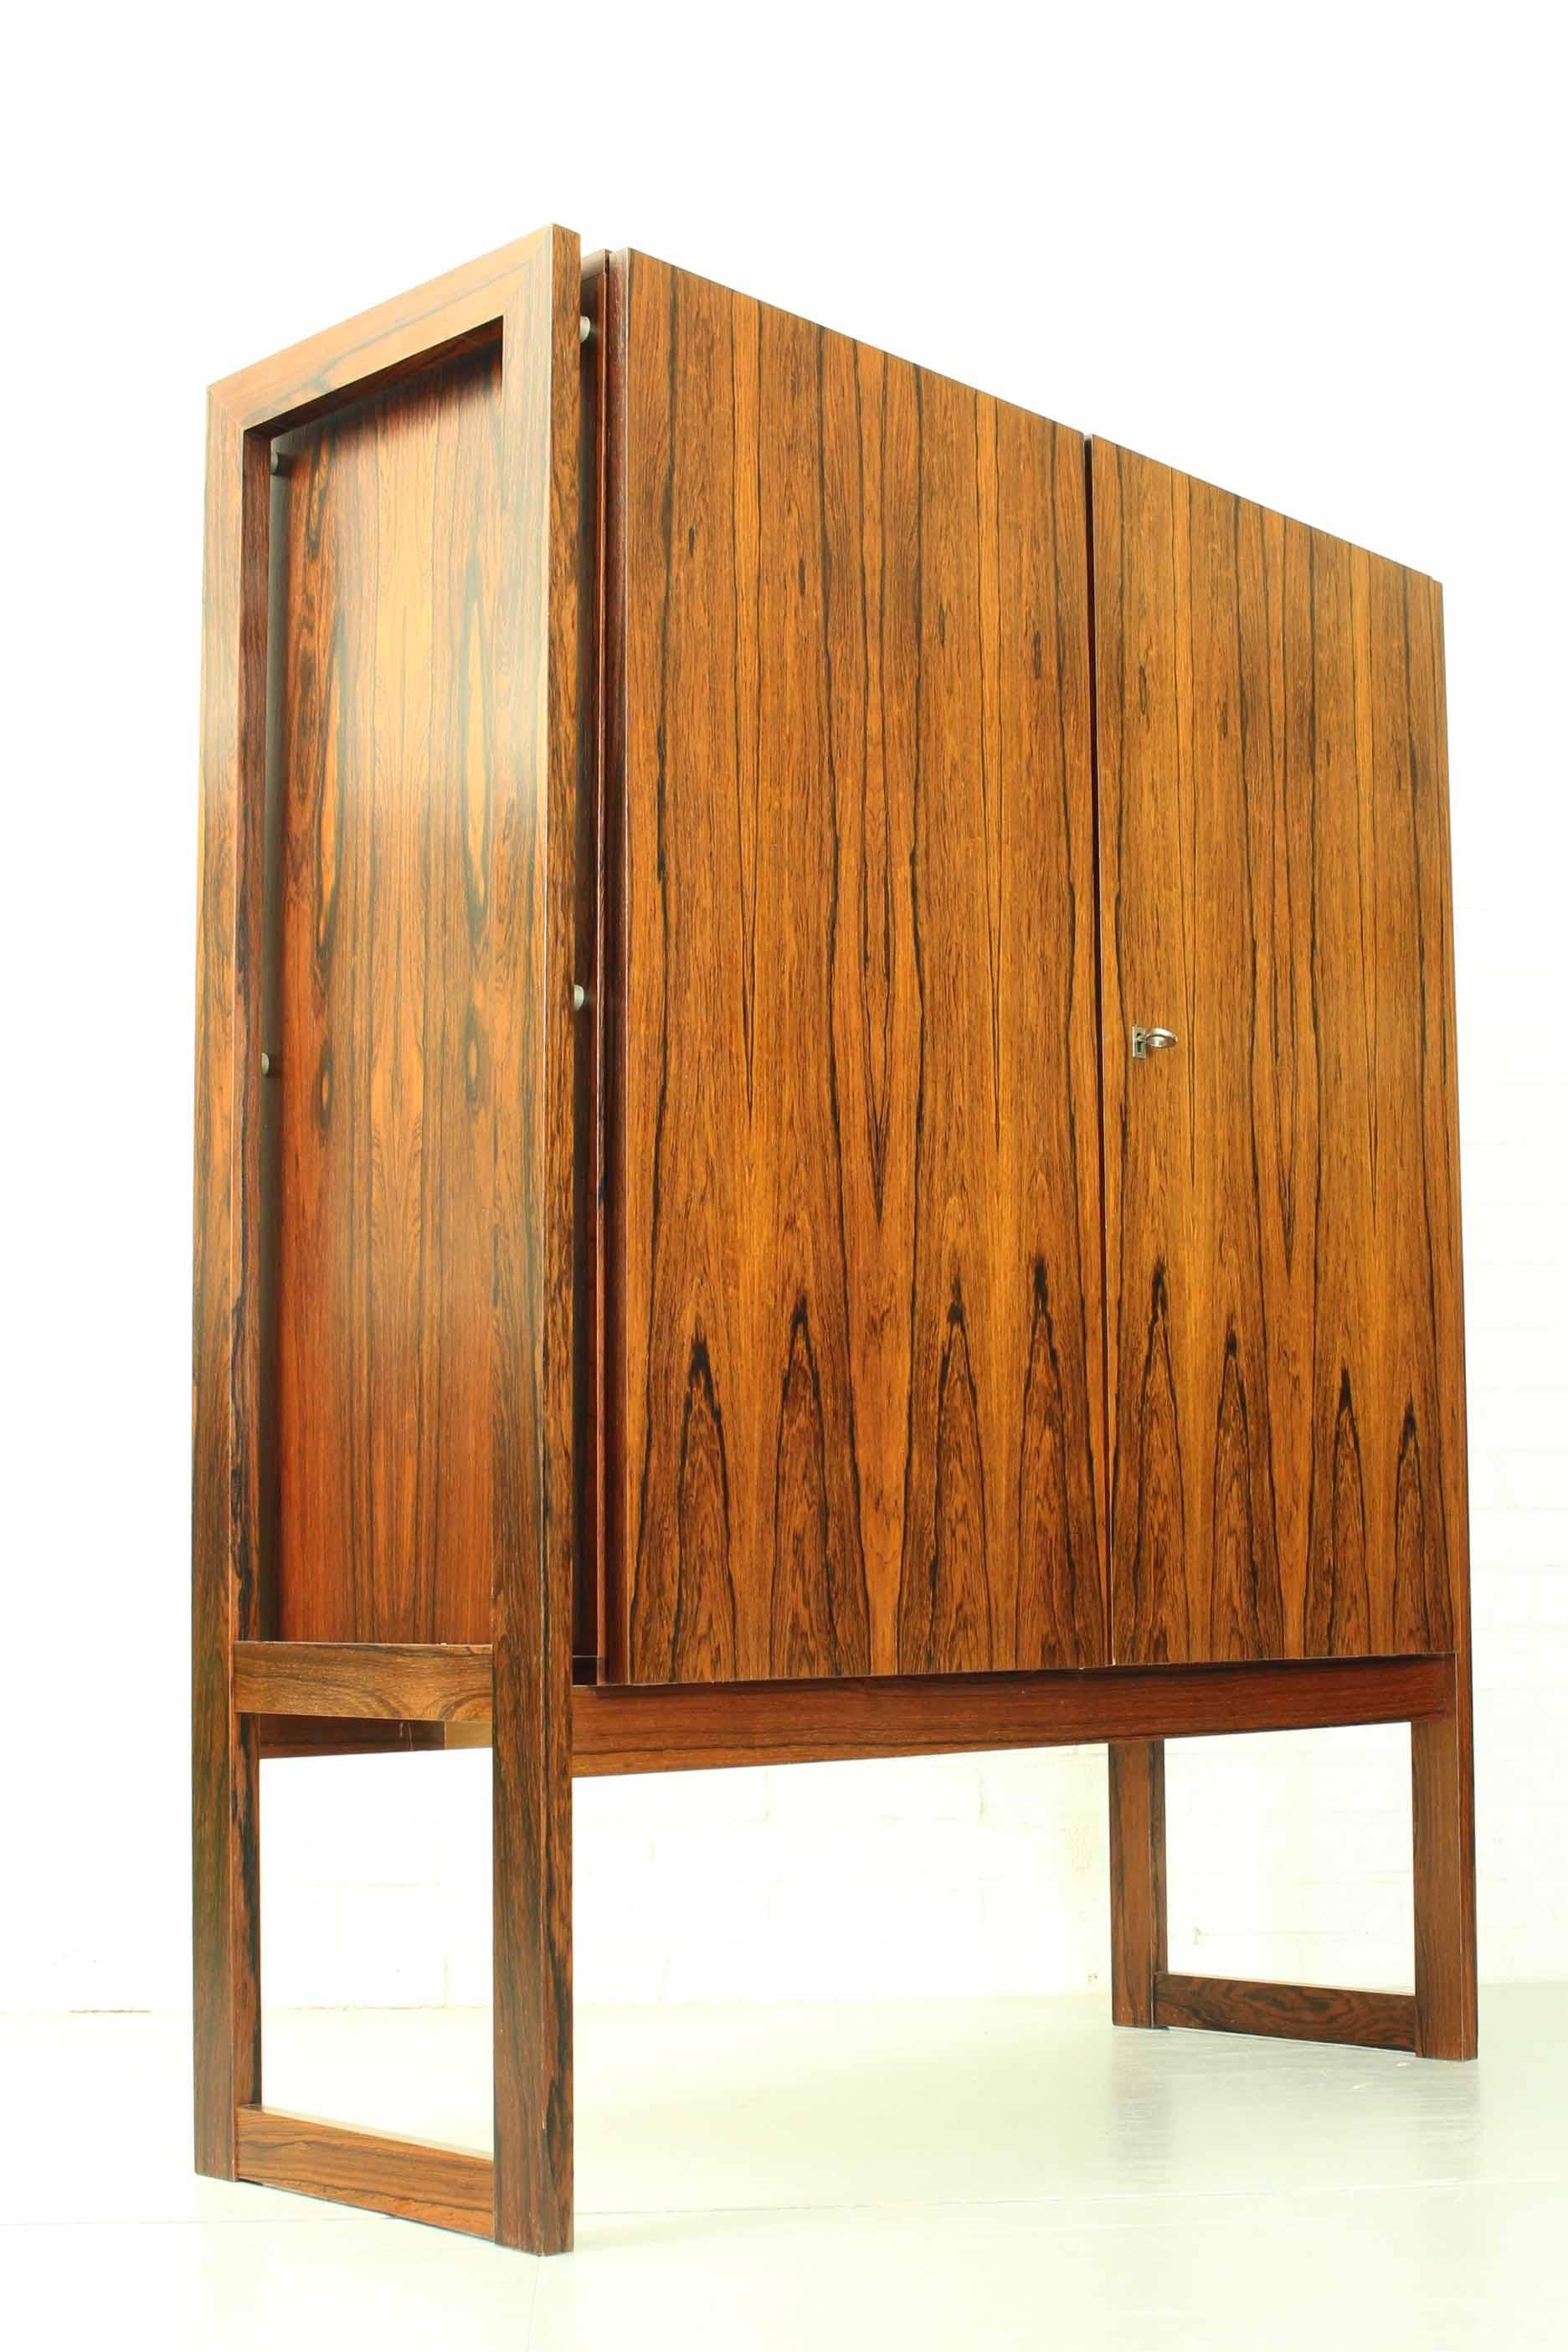 Veneer Highboard “Malmo” Within Wood Frame, Executed in Rio Palissander, 1960s